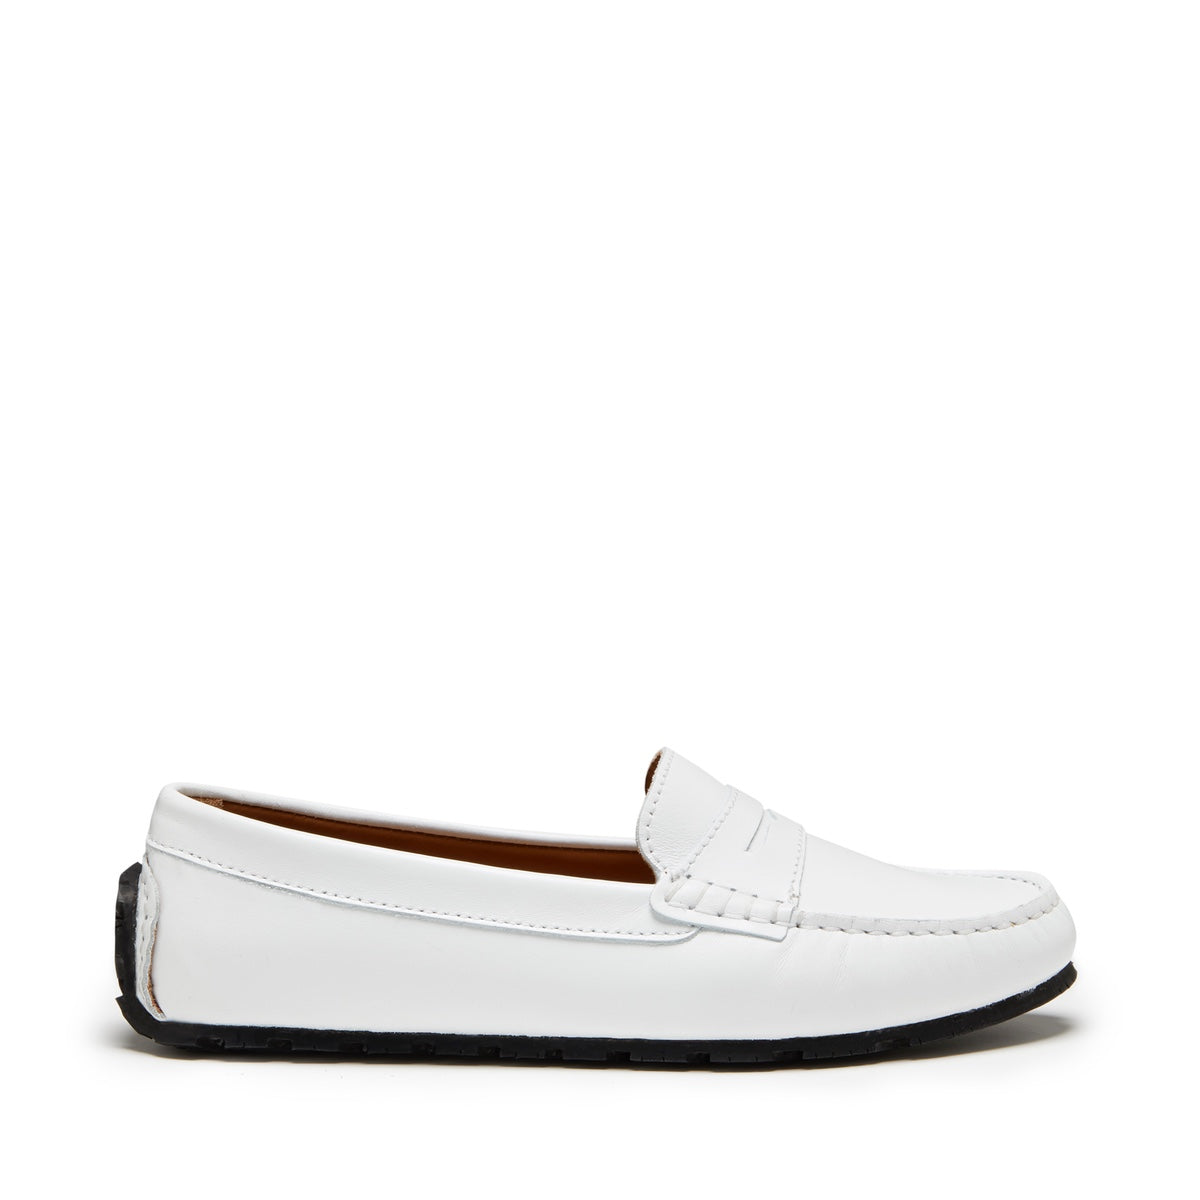 Women's Tyre Sole Penny Loafers, white leather - Hugs & Co.